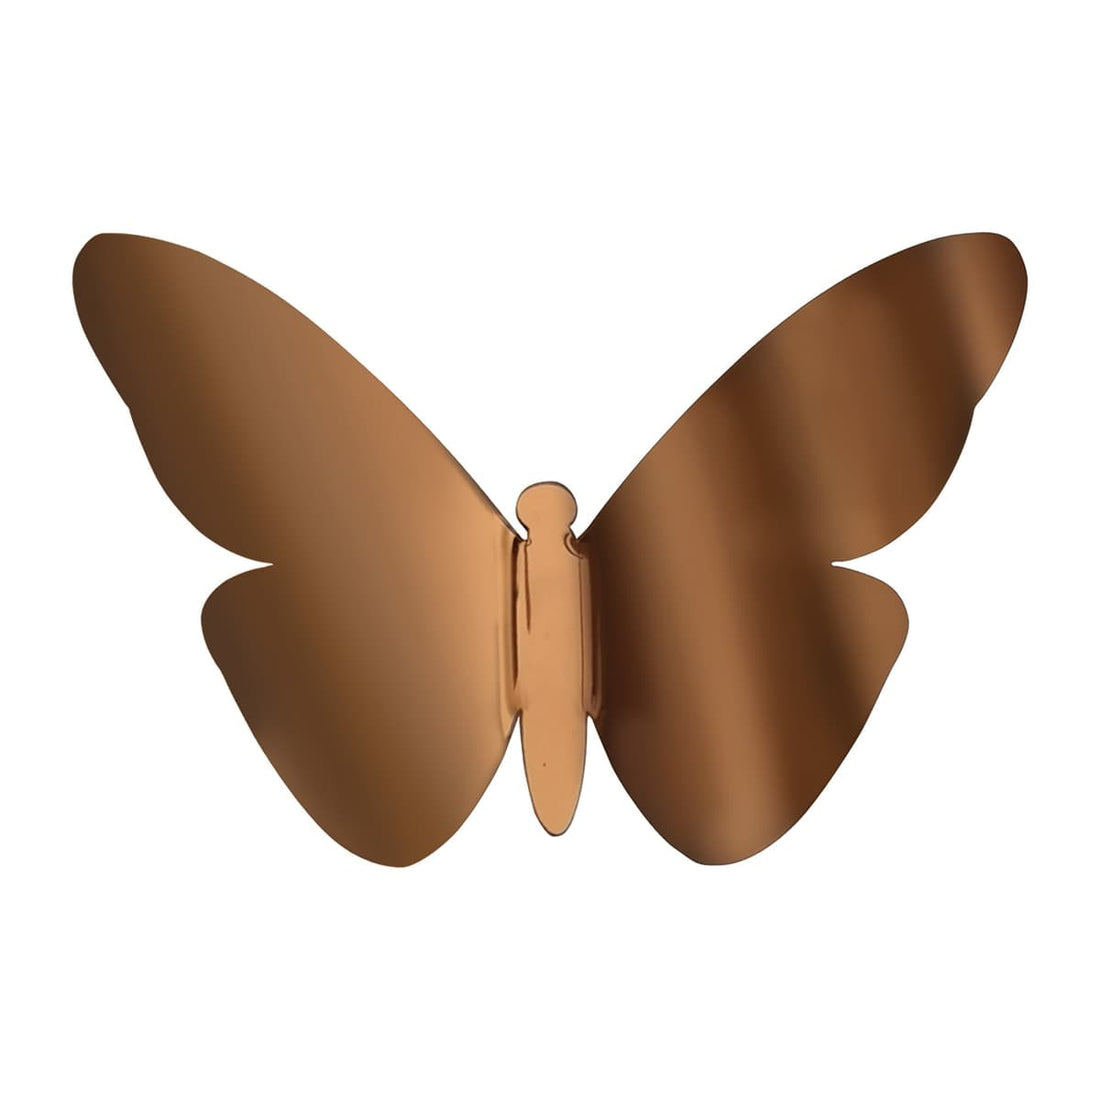 ADHESIVE 3D BUTTERFLY SHAPES BRONZE 32X12CM - best price from Maltashopper.com BR480008458